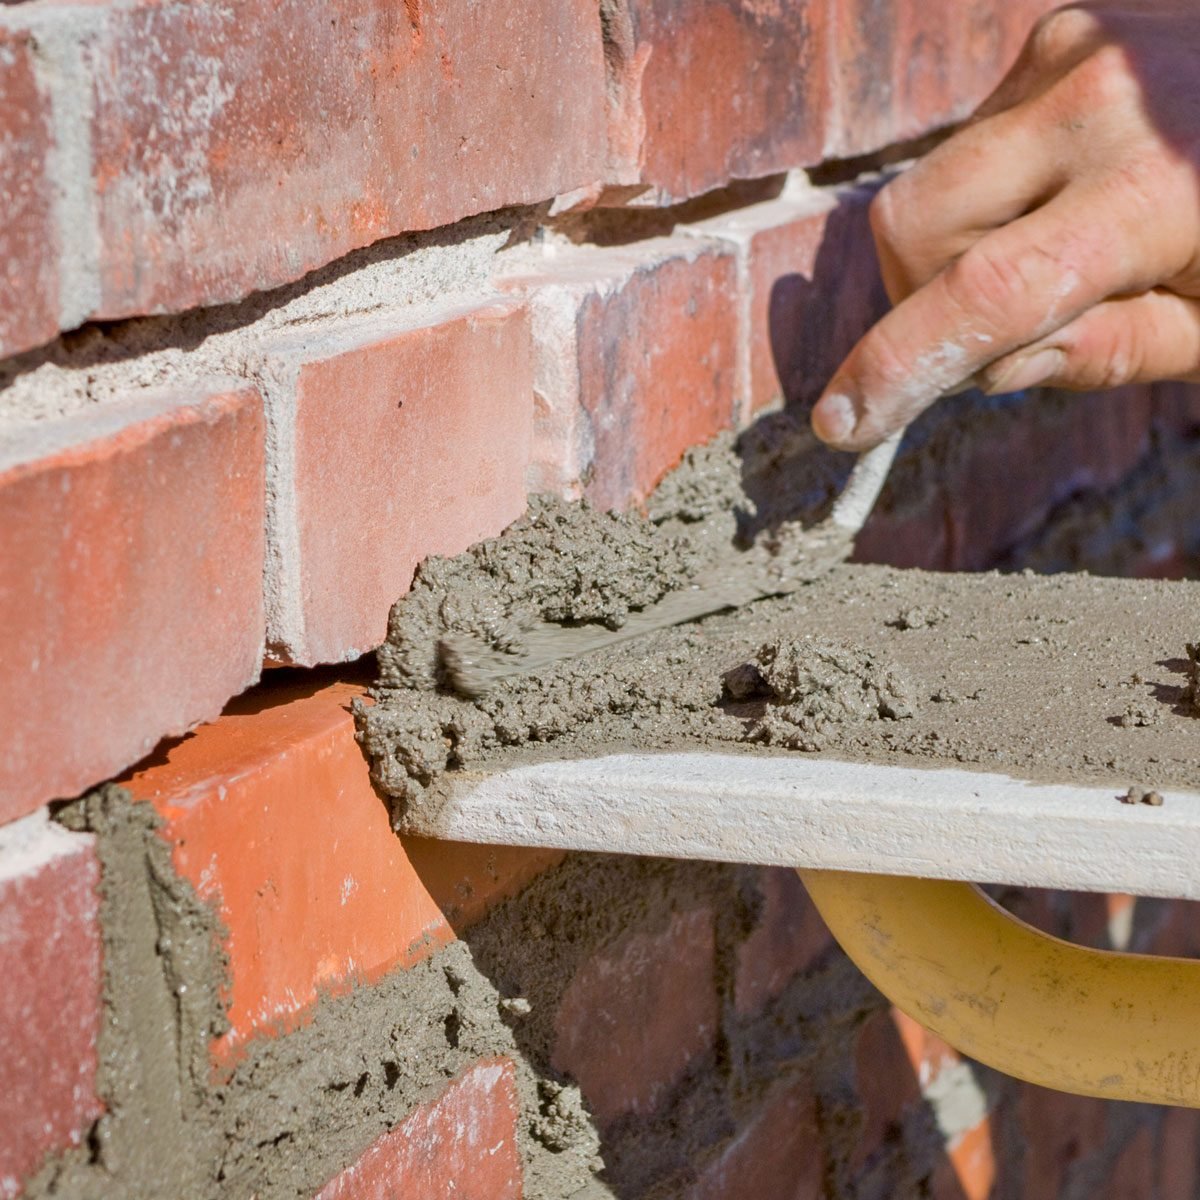 How to Reset a Loose Brick